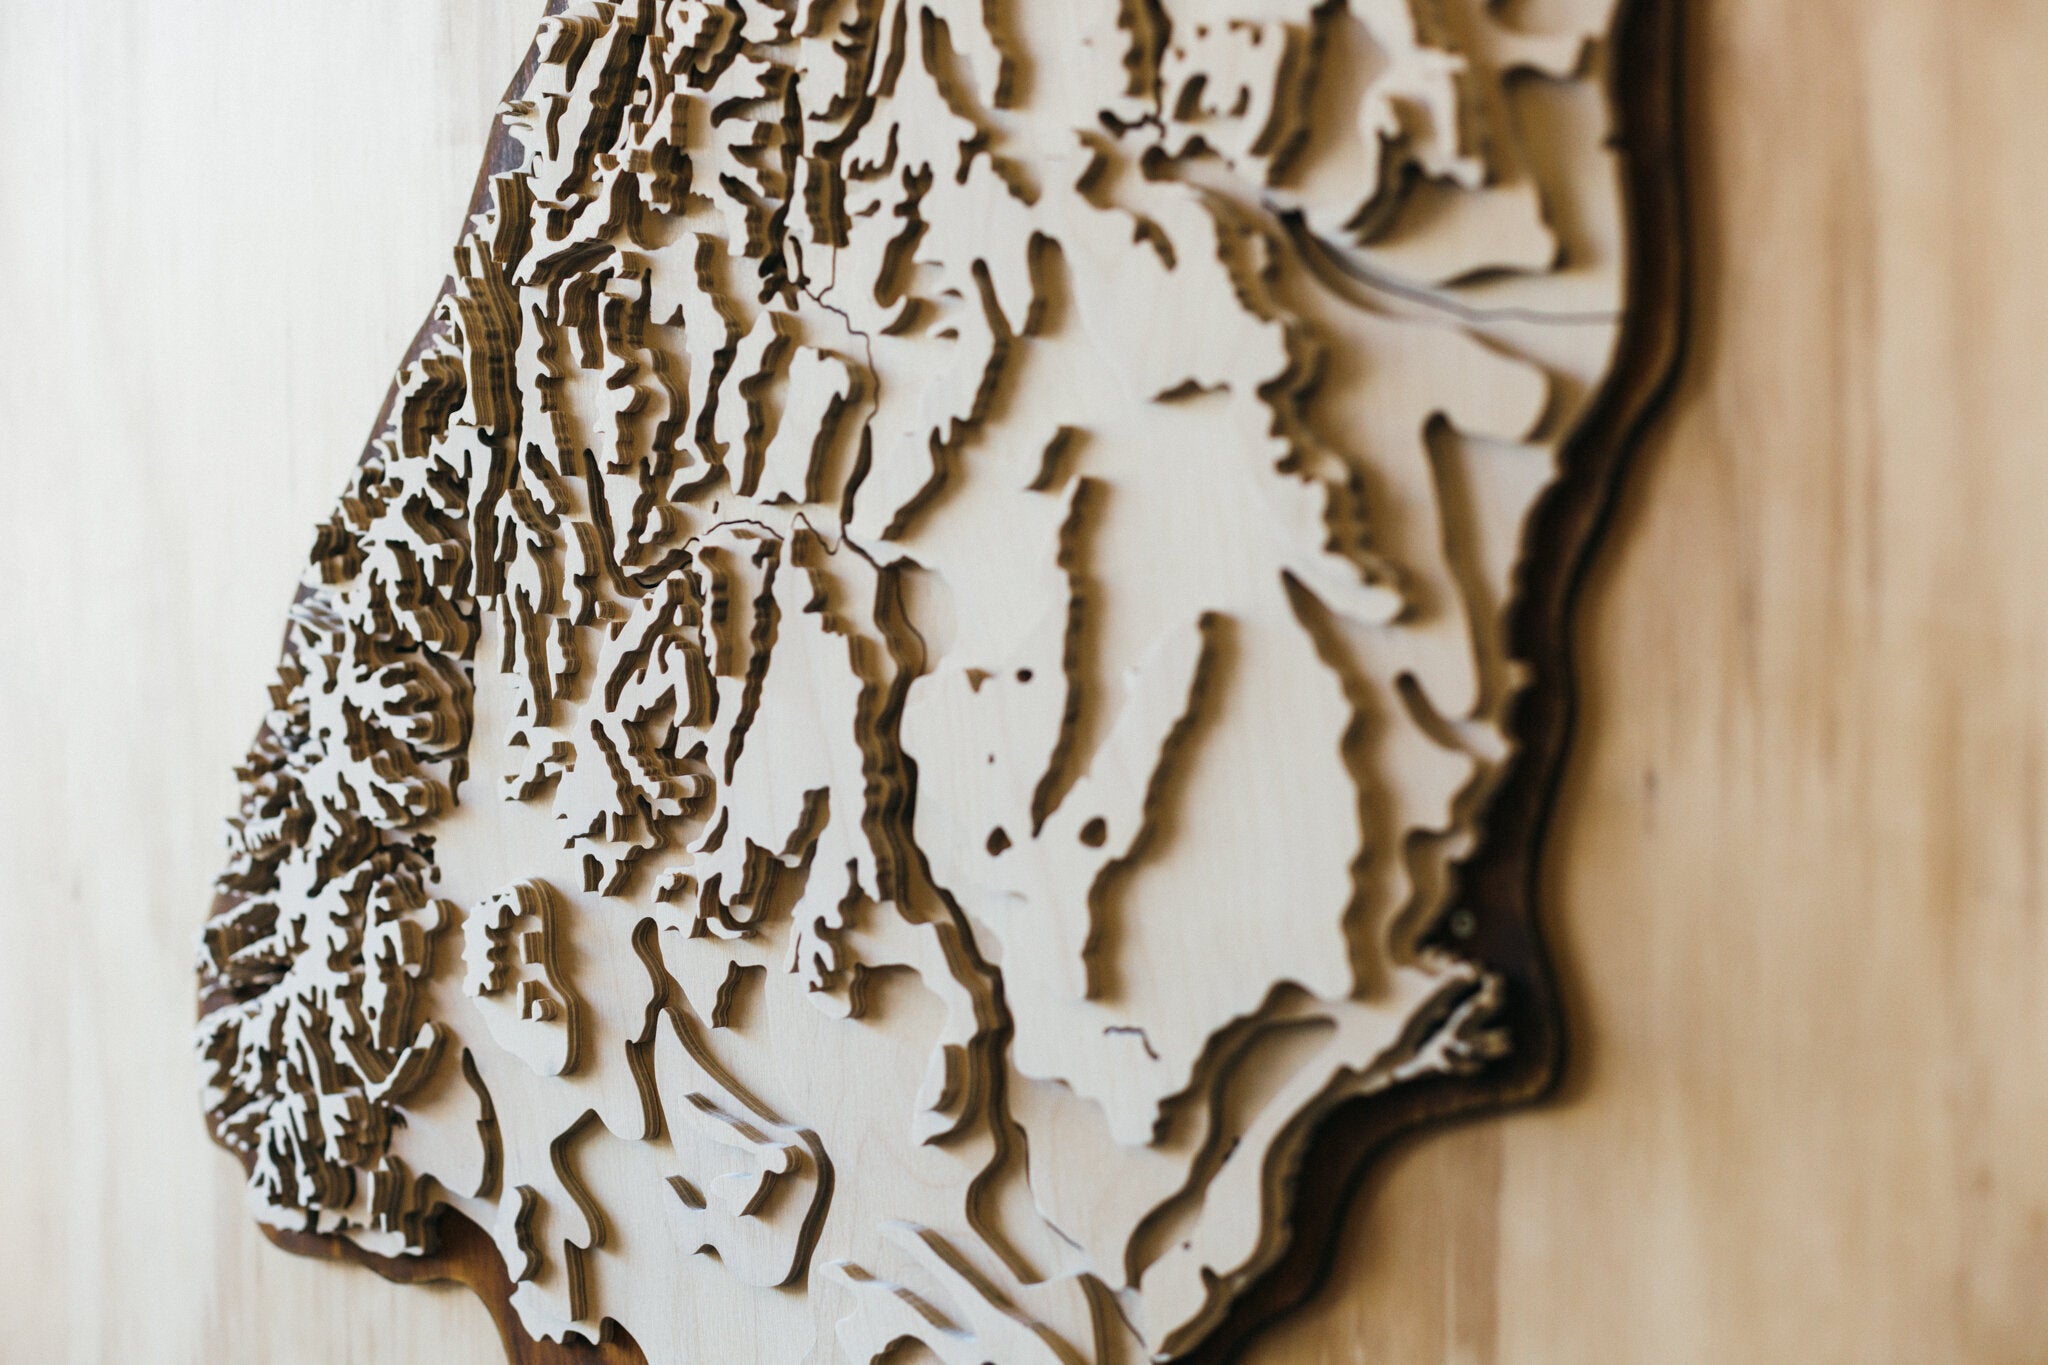 wooden topographic maps, wooden map of new zealand, wooden topo maps, layered topo maps wood, Nz topo maps, wooden map of new zealand, wood map, wood topo art, wooden artwork, wooden art, new zealand wooden map, map of new zealand, office artwork, new zealand office artwork, interior design, interior artwork, office fit out ideas 